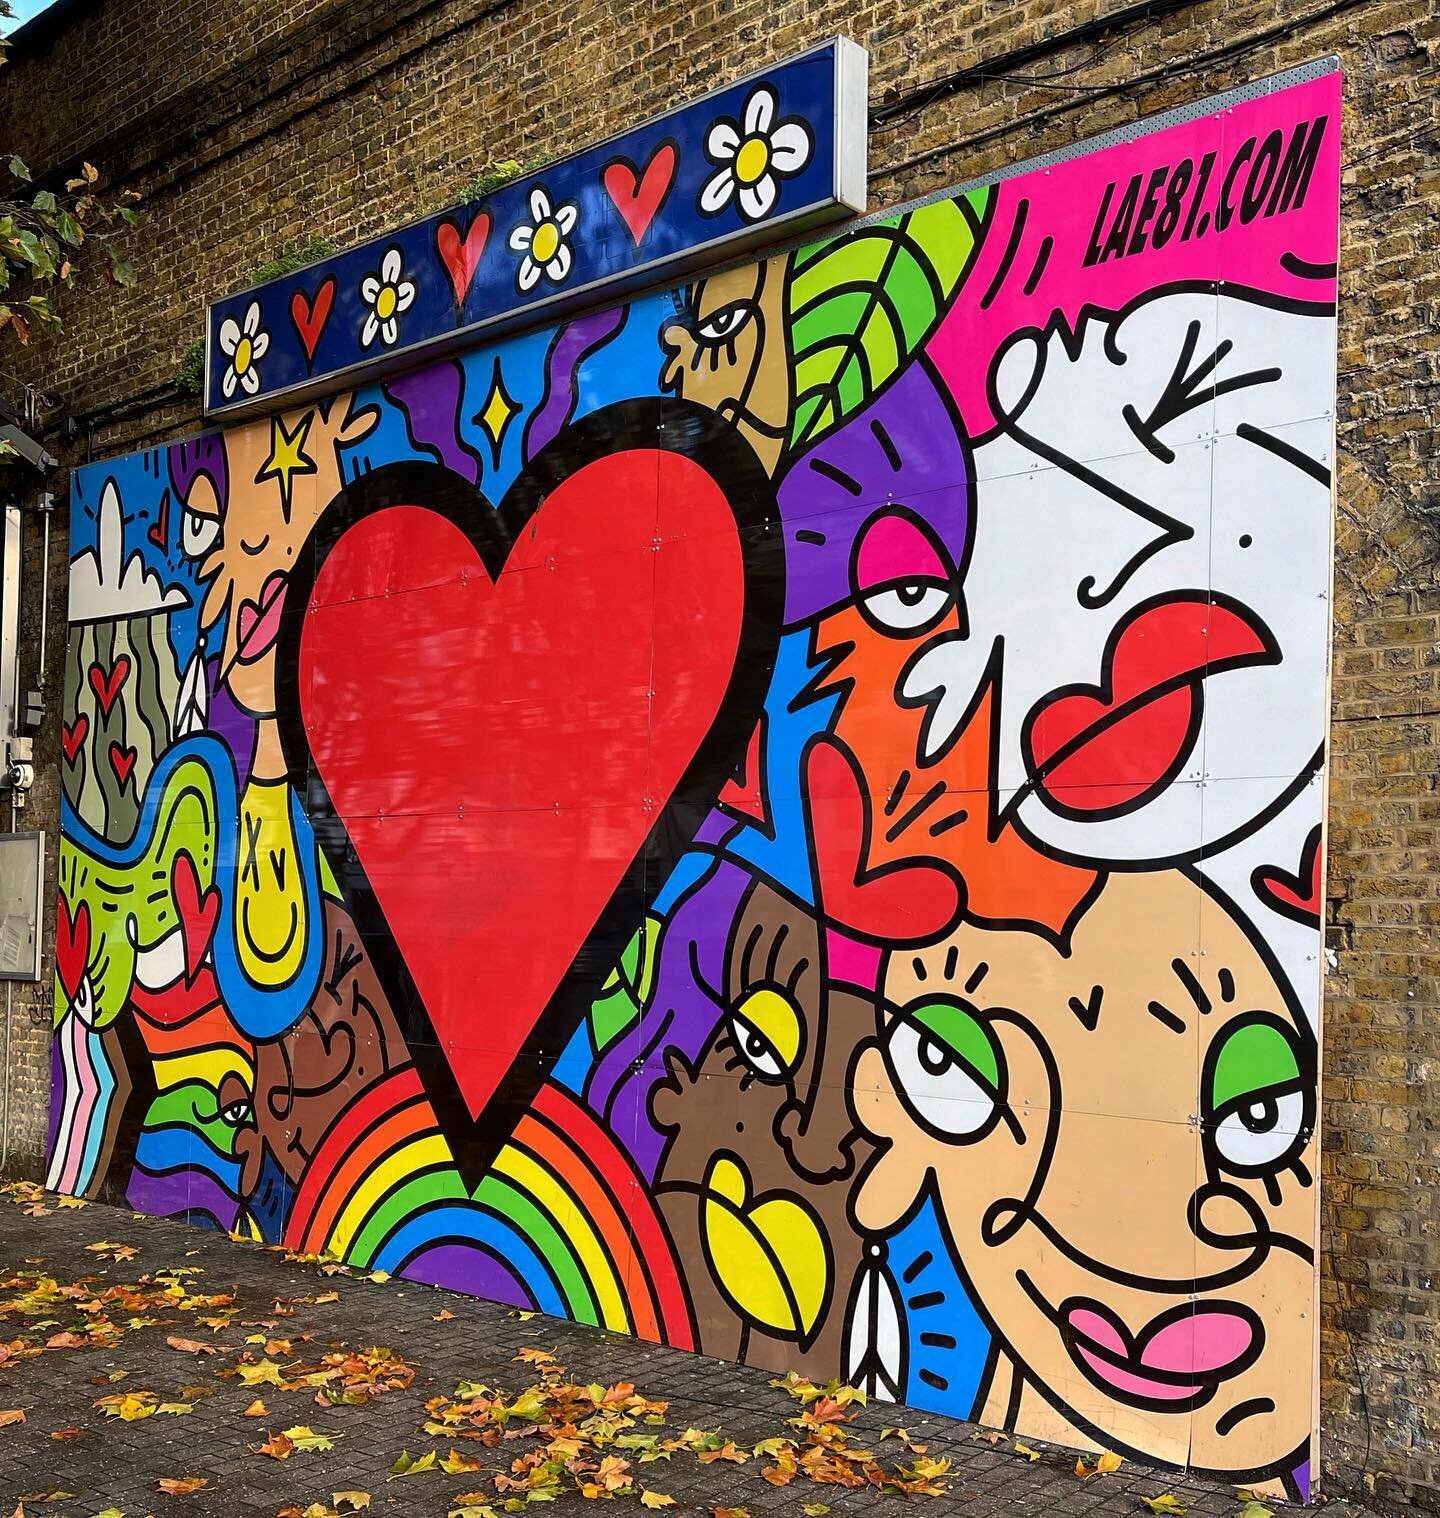 Serving up another huge slice of positivity and good vibes for the fantastic @moniker.art @vauxhallone in Vauxhall #london 🥰🌈❤️🏳️&zwj;🌈. Carrying on with the Love different theme I created this digital piece to uplift and bring the community of S